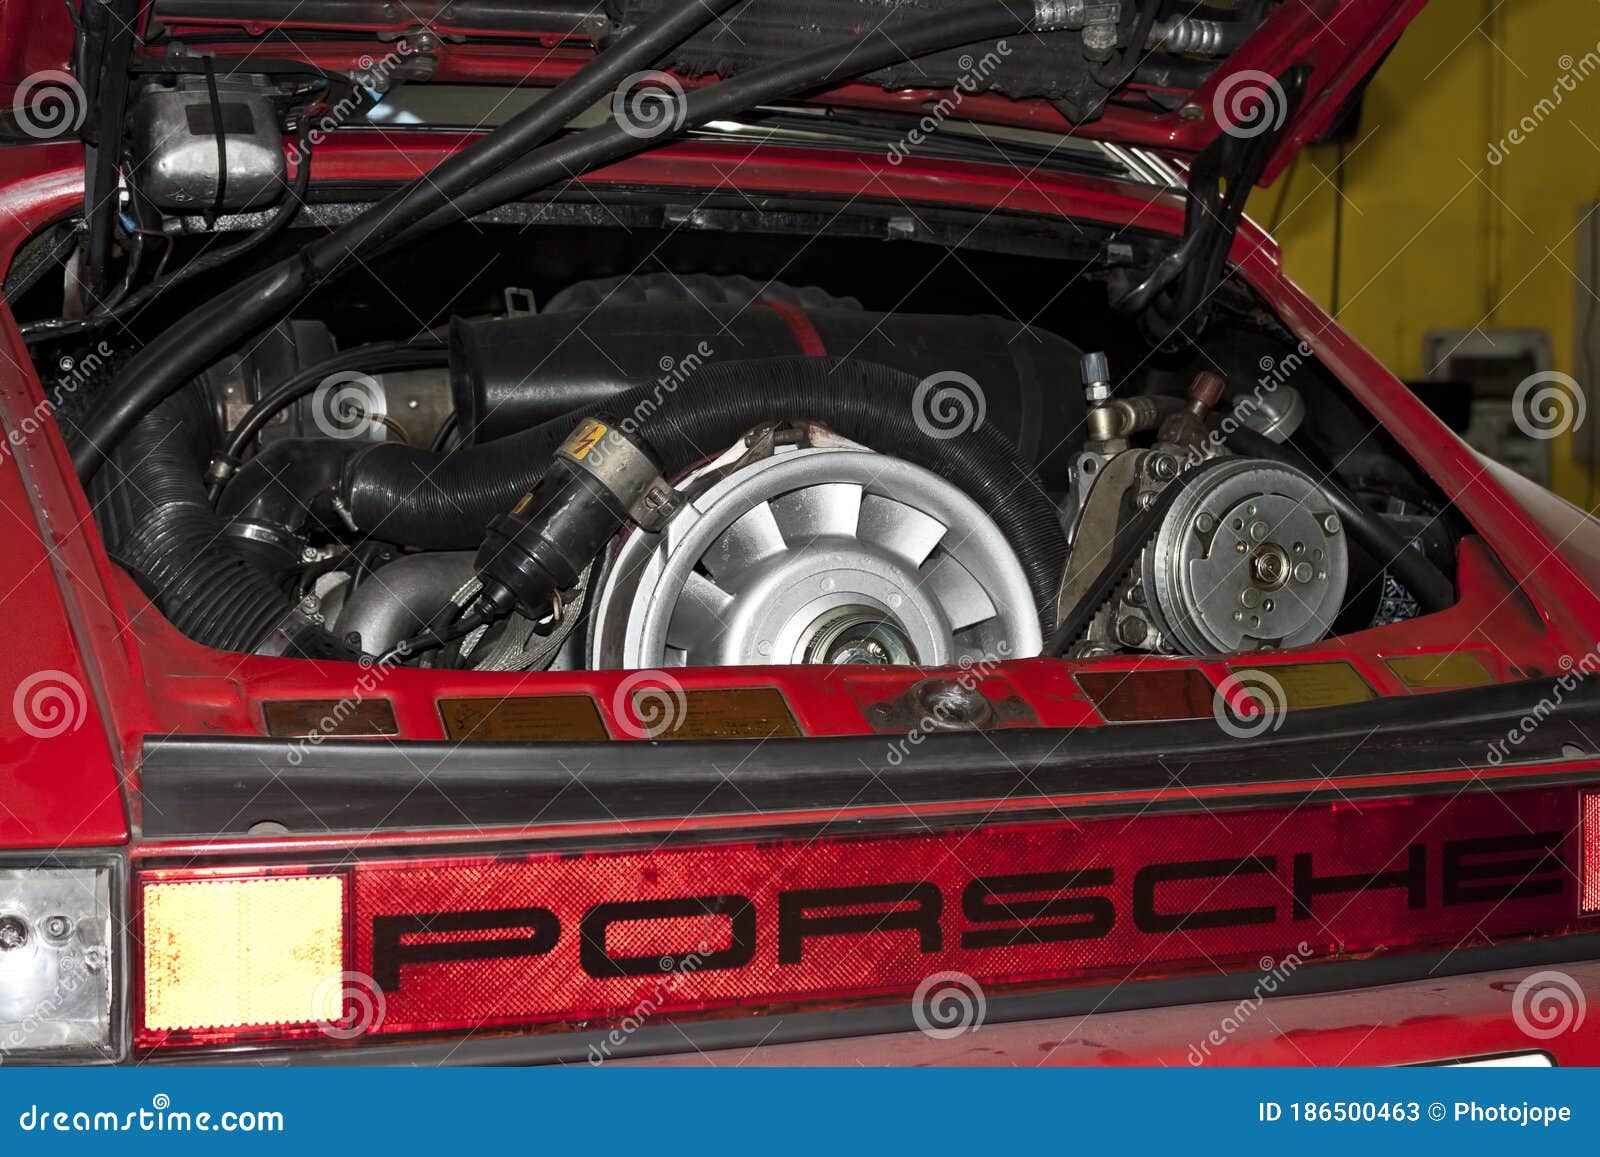 Vigo, Spain - Feb 18, 2020: Engine of a Red Classic Porsche 911 Coupe  Carrera G-Modell 915, 1986 on the Garage for Maintenance Editorial Stock  Photo - Image of city, luxury: 186500463